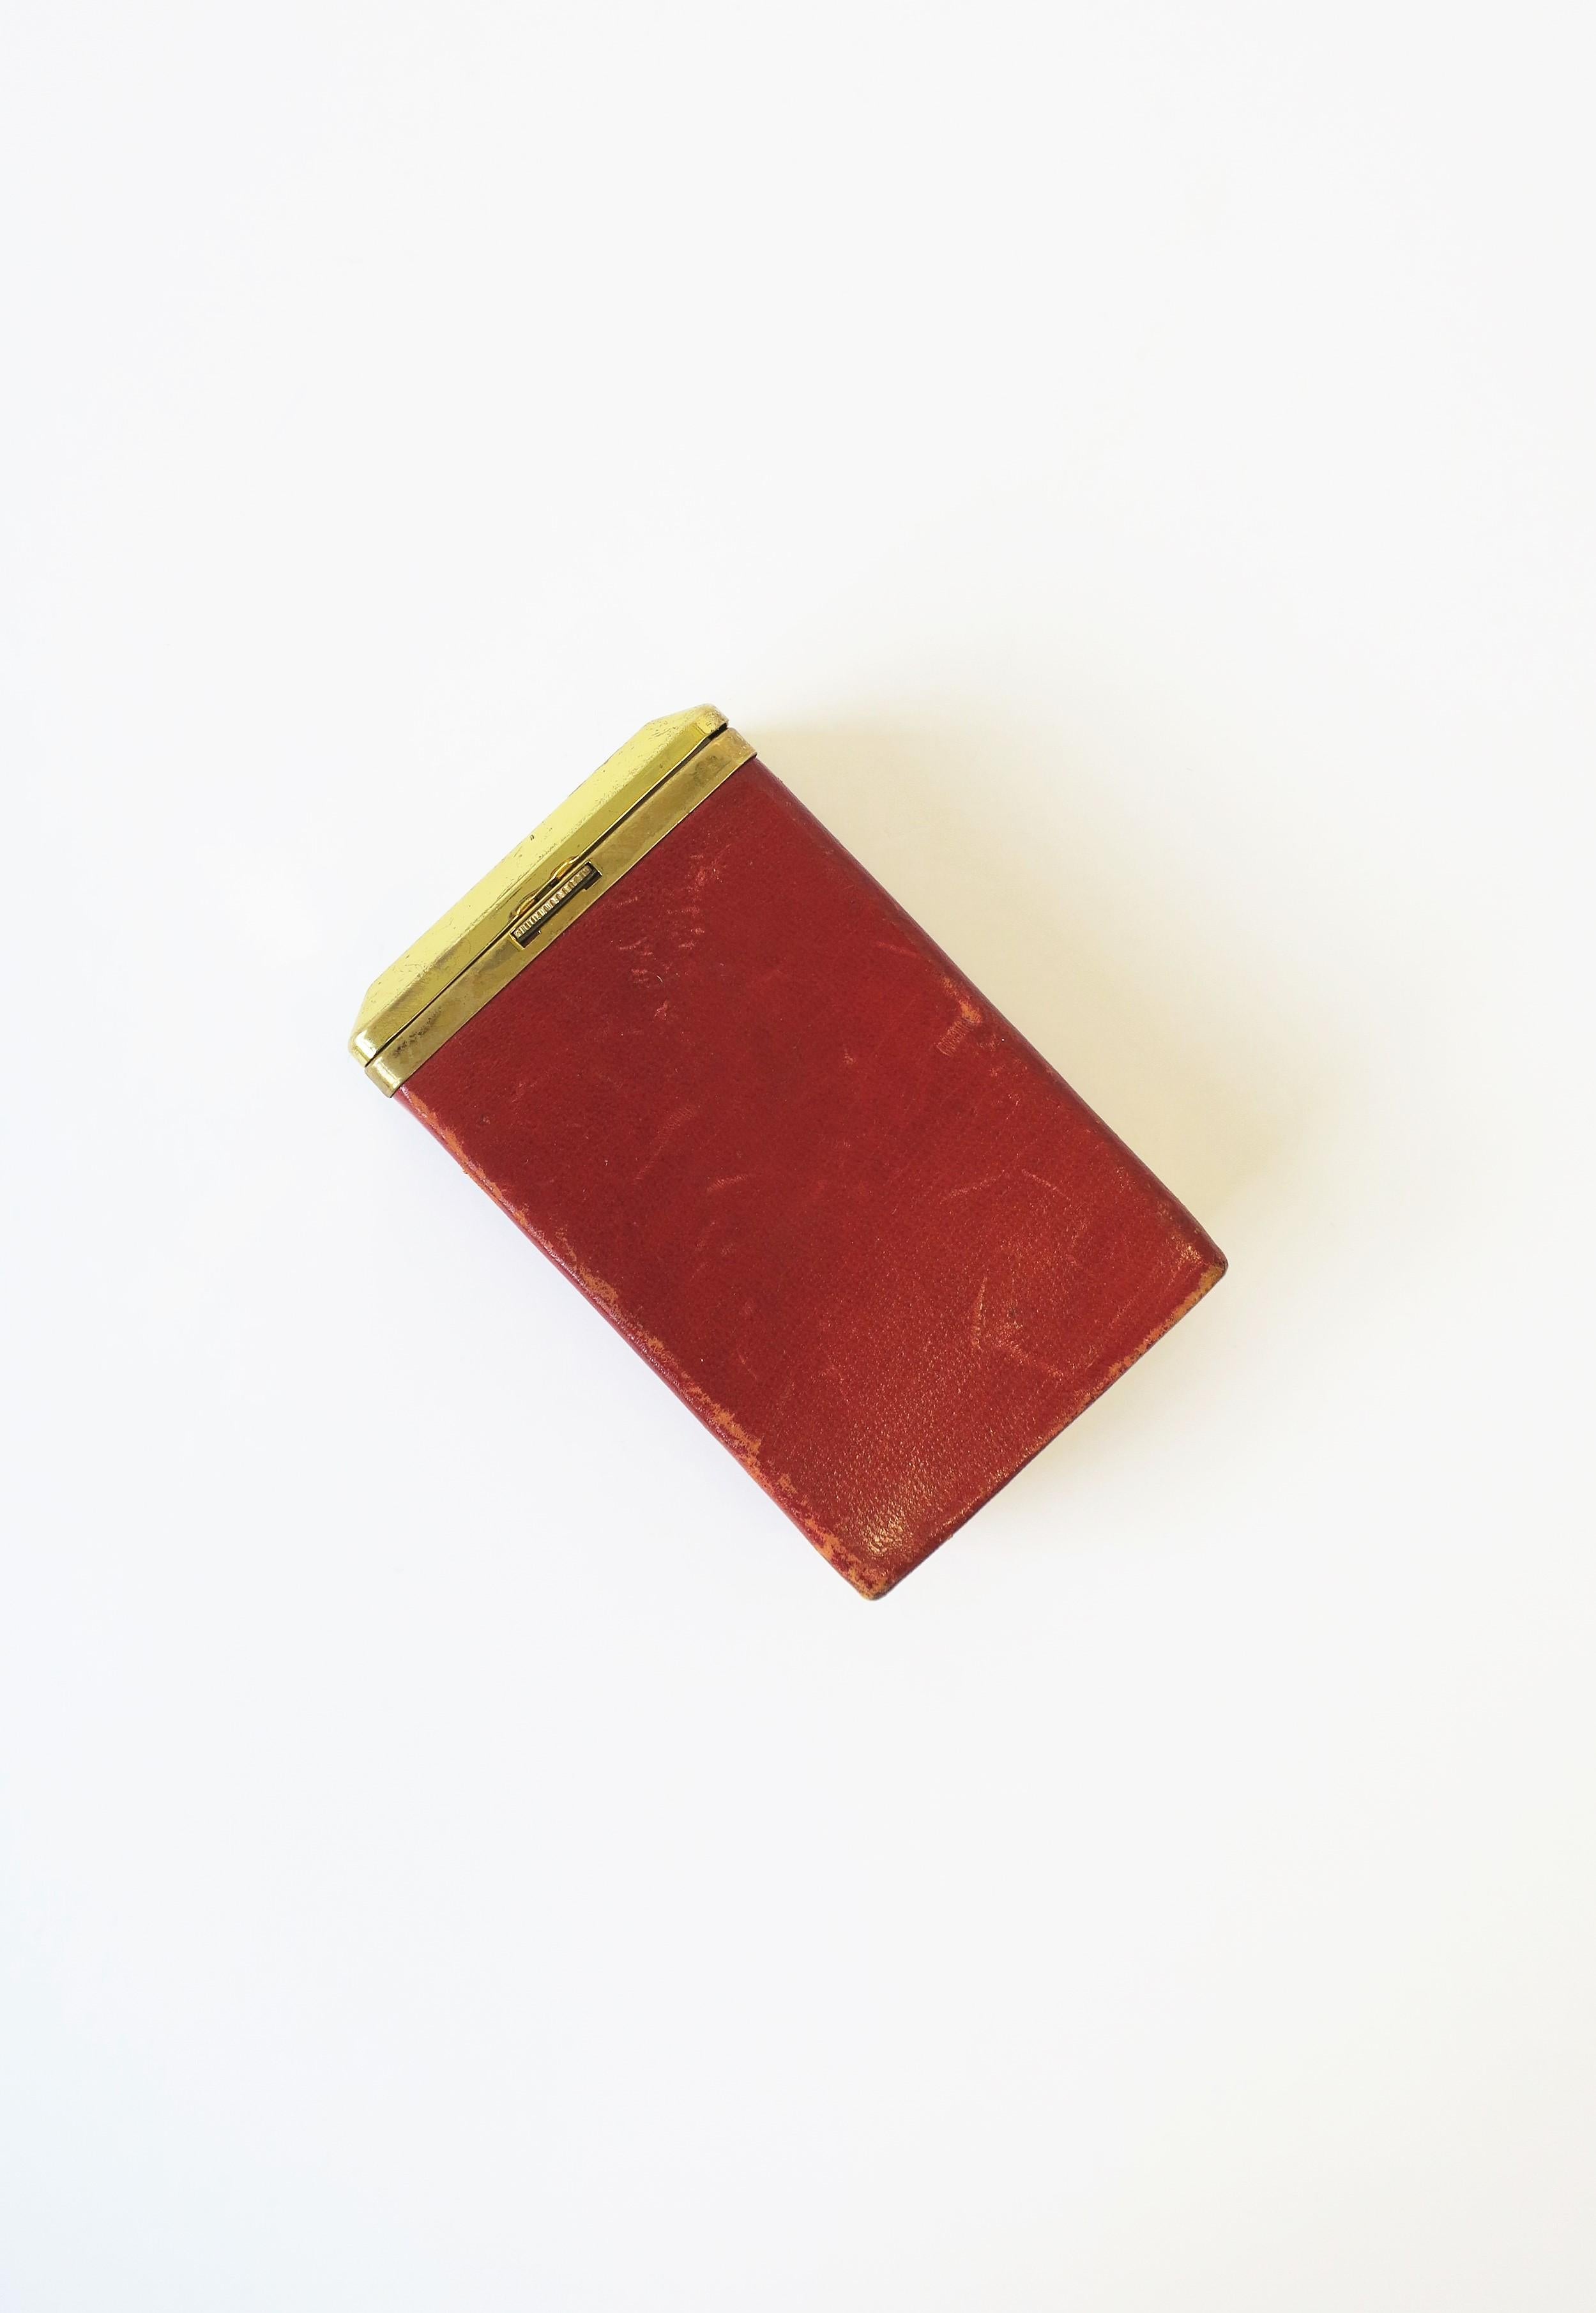 A chic Modern Euro red leather and brass cigarette 'box' holder case, circa 20th century, Spain. Box comfortably holds cigarette box, easily opens with the press of the serrated button, and closes equally as well. Piece is marked on bottom, 